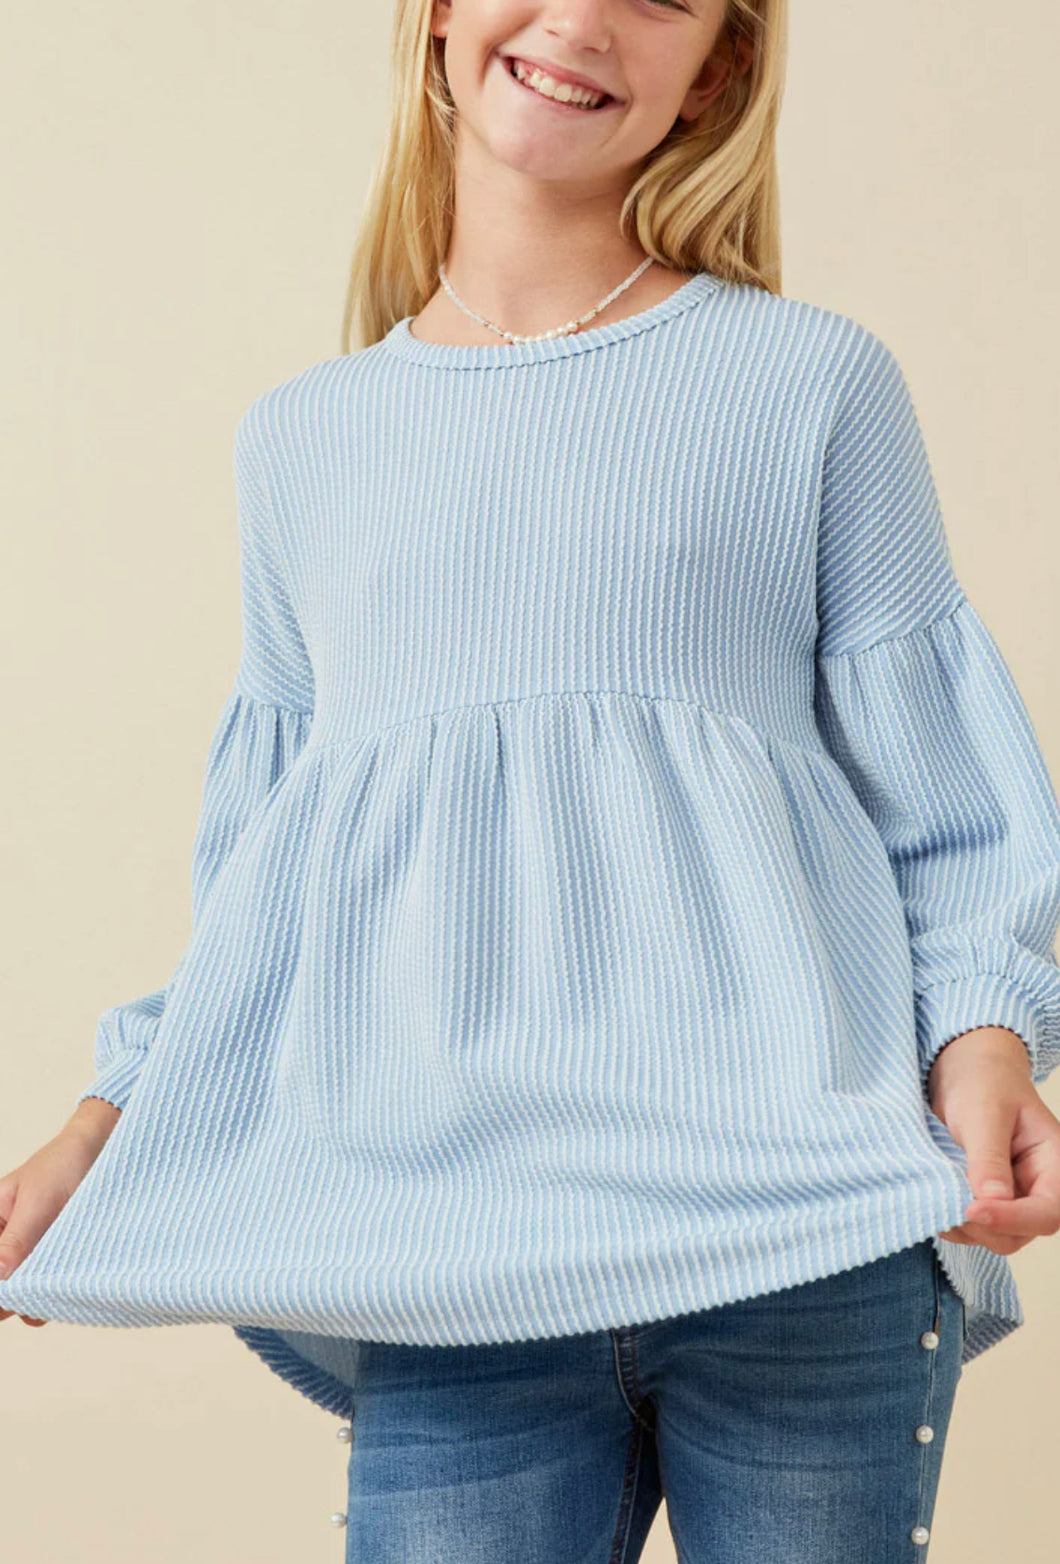 Blue Textured Babydoll Top